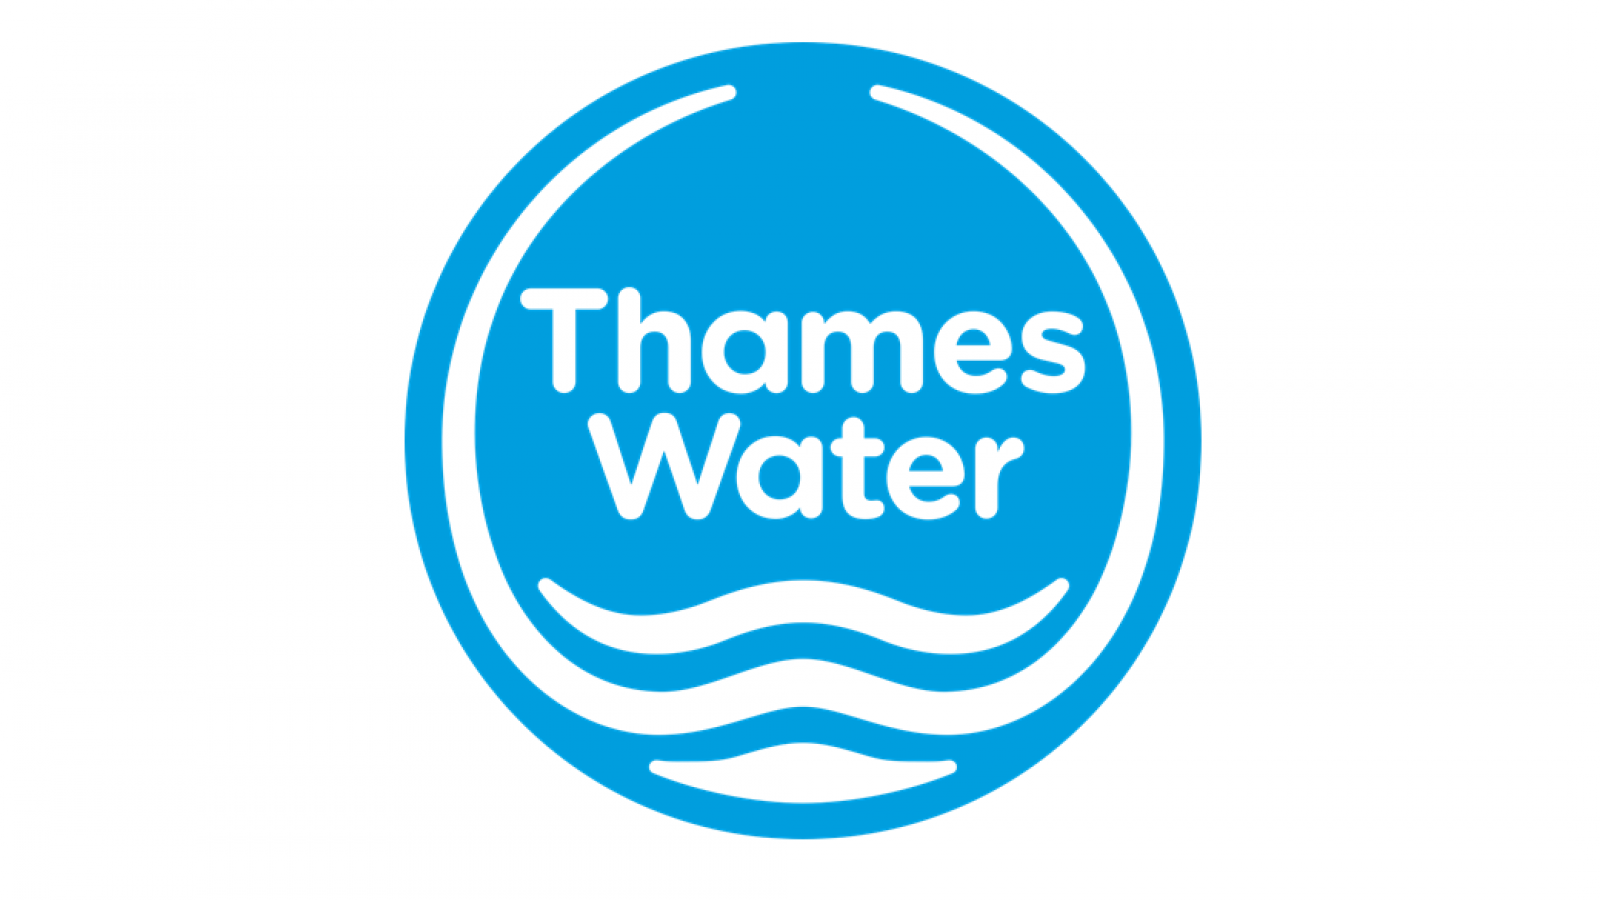 Thames Water - Lifecycle Frameworks